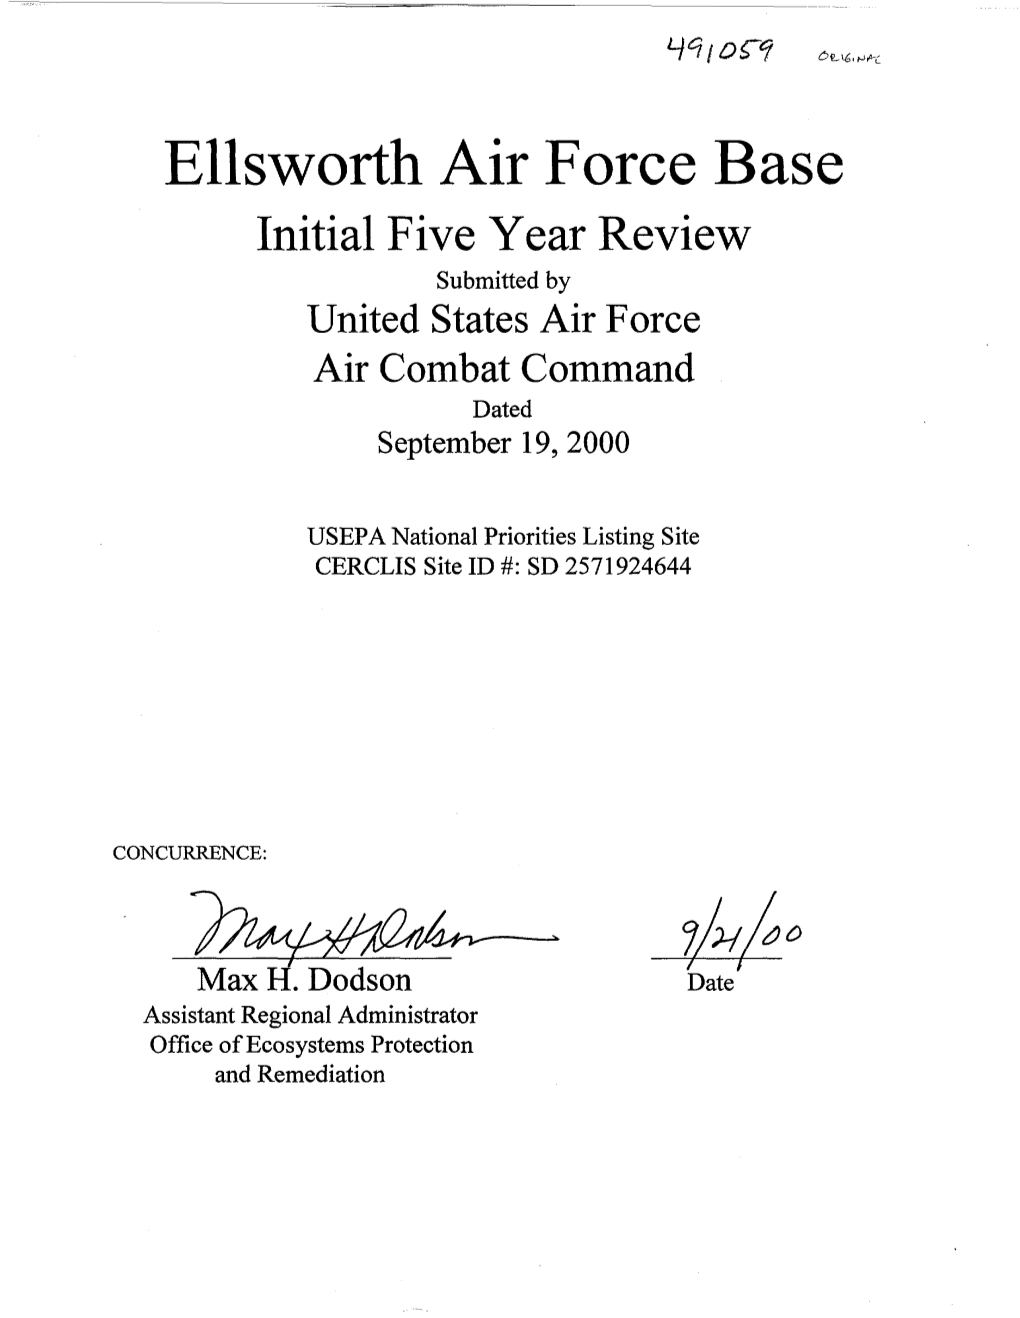 Initial Five Year Review, United States Air Force Air Combat Command